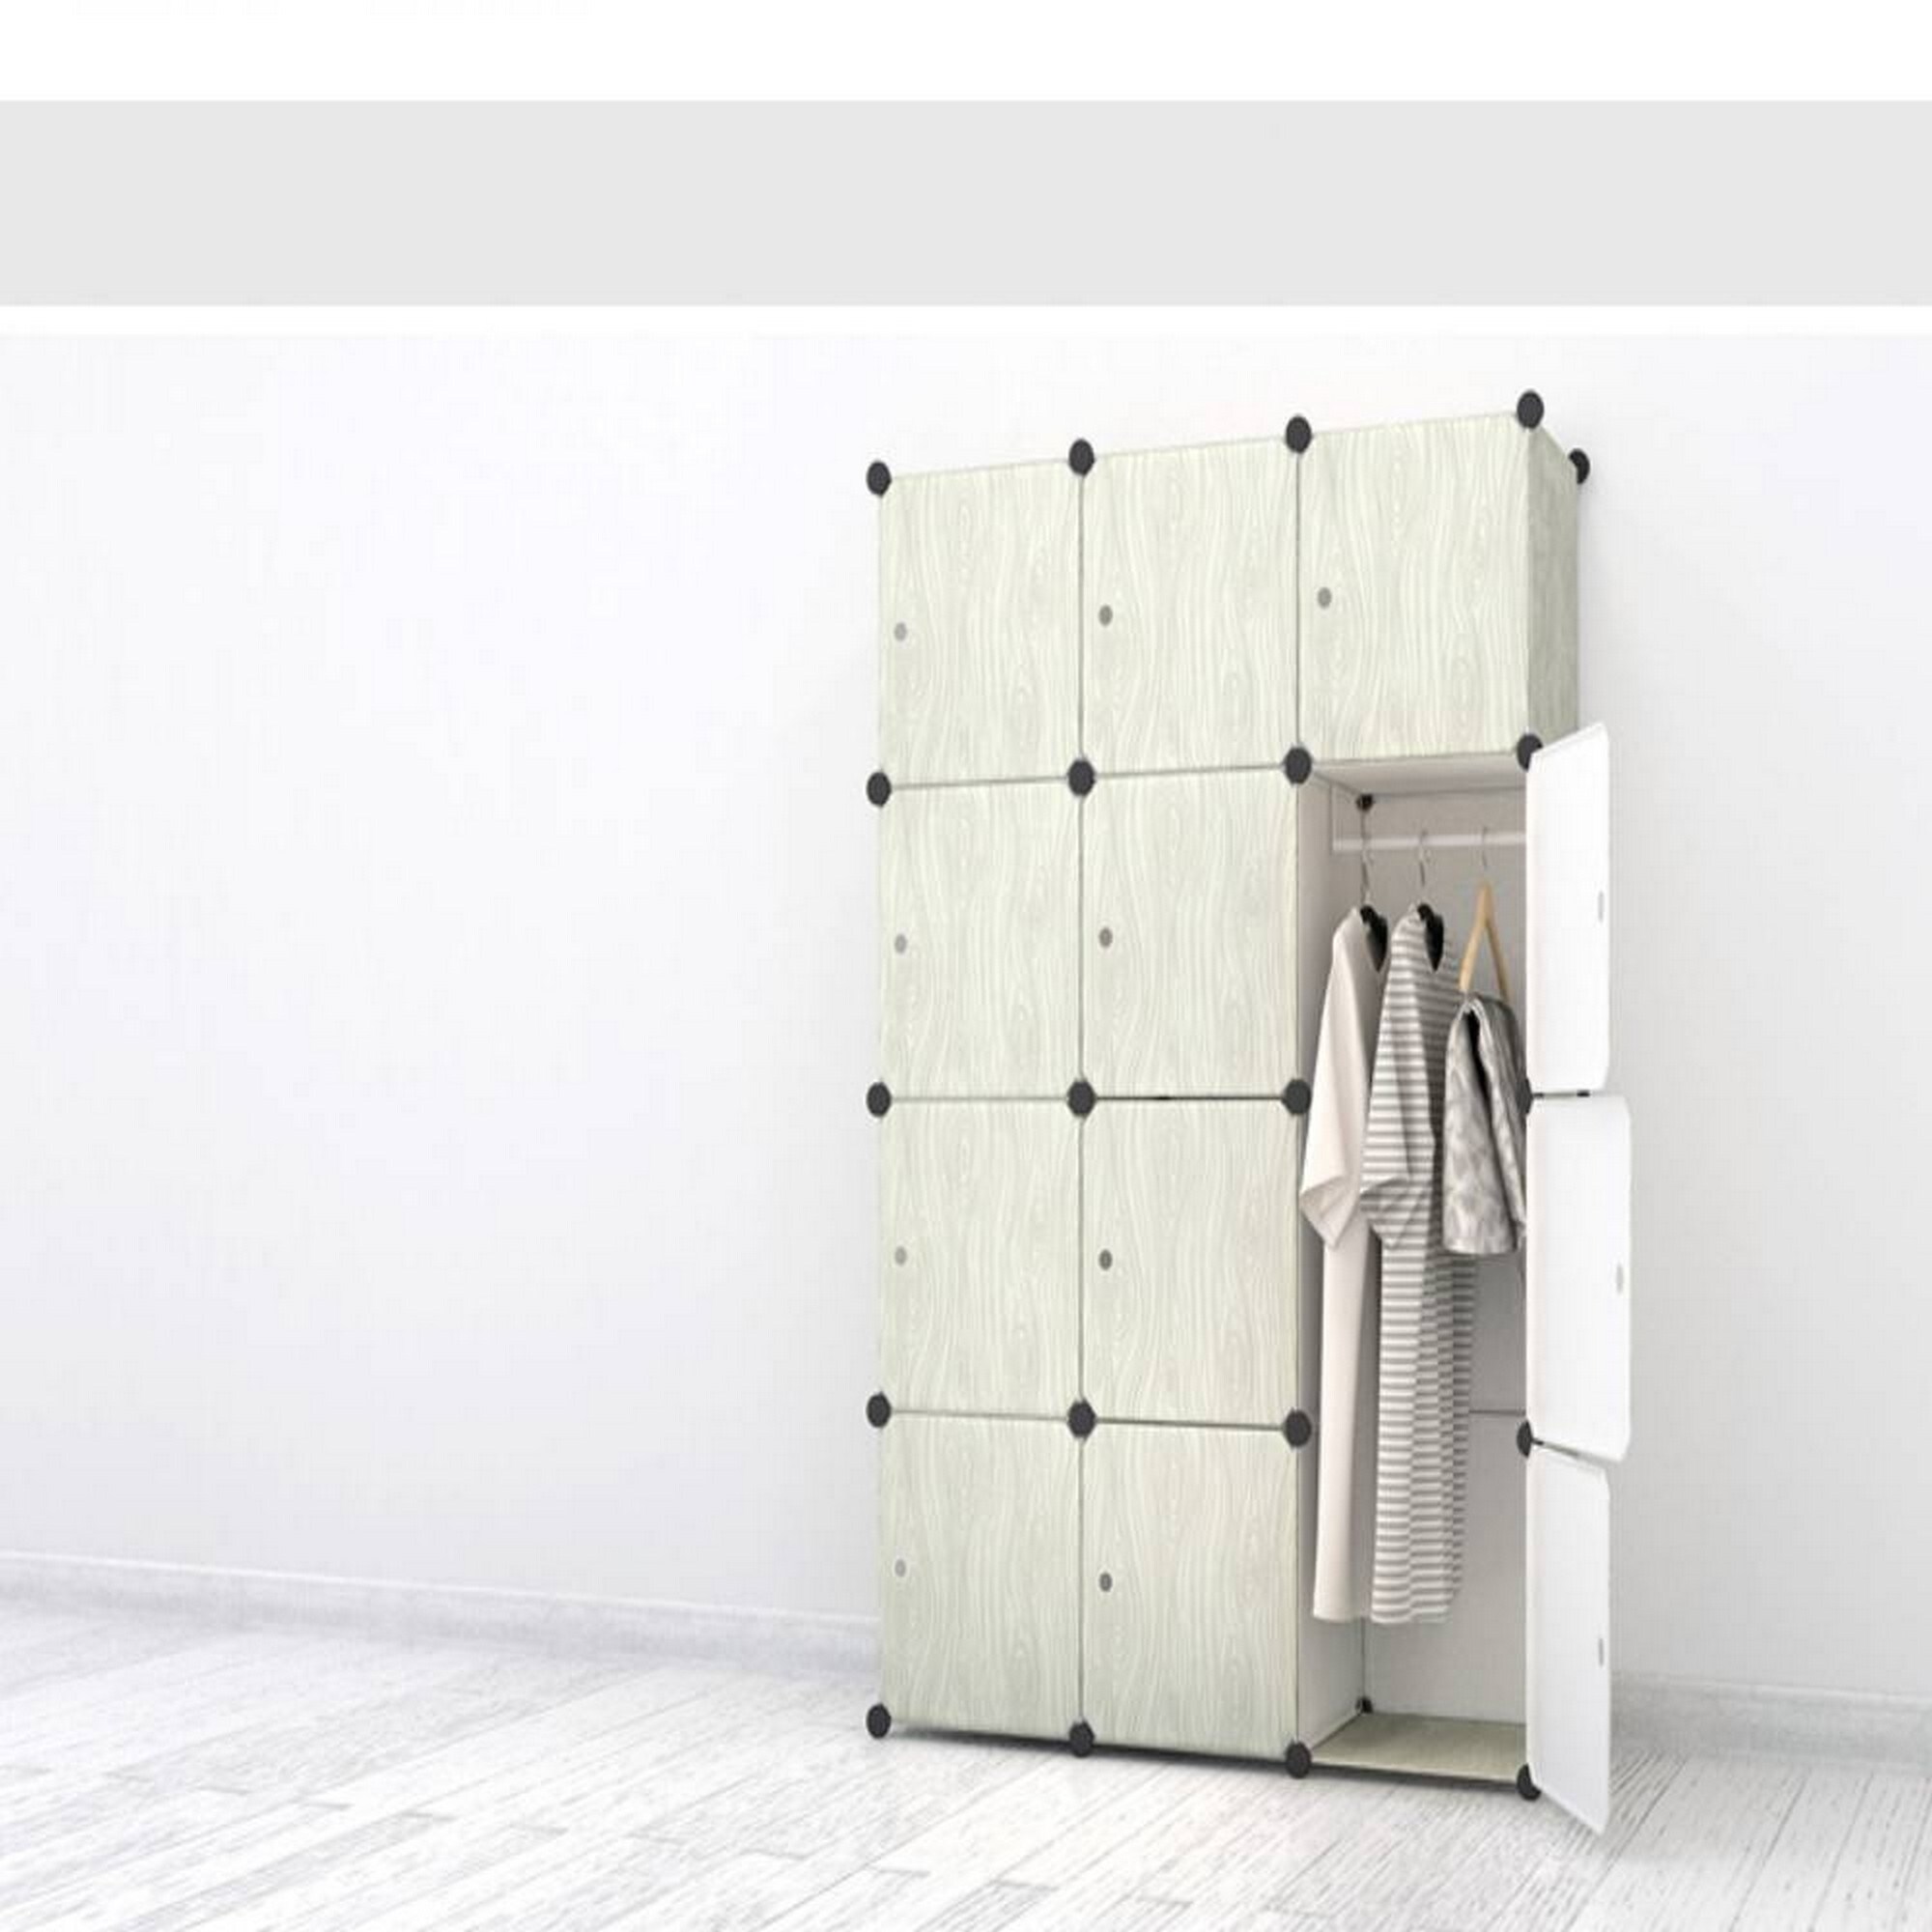 44 x 15 x 58 DIY Stackable Storage Cabinet - Woodwhite